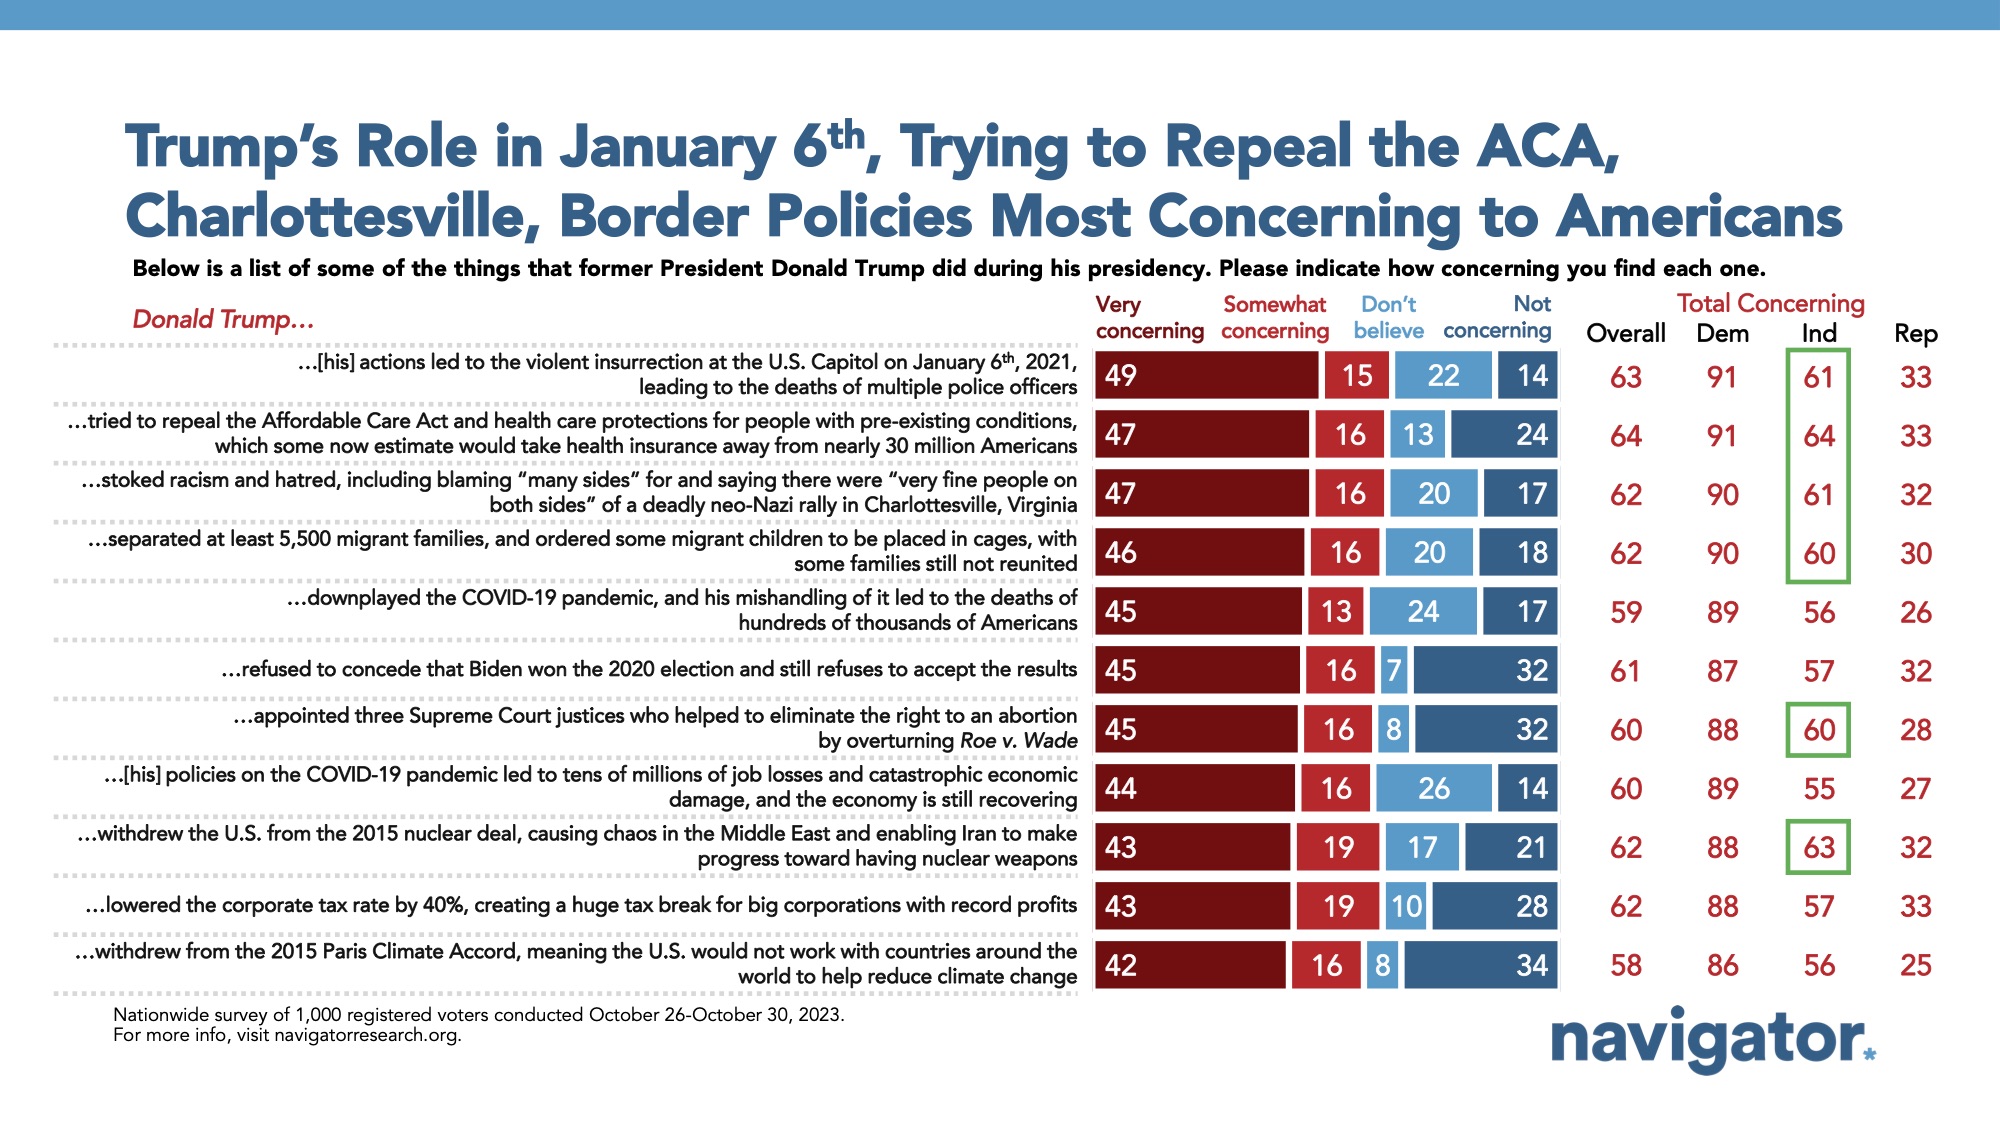 Bar graph of polling data from Navigator Research. Title: Trump’s Role in January 6th, Trying to Repeal the ACA, Charlottesville, Border Policies Most Concerning to Americans